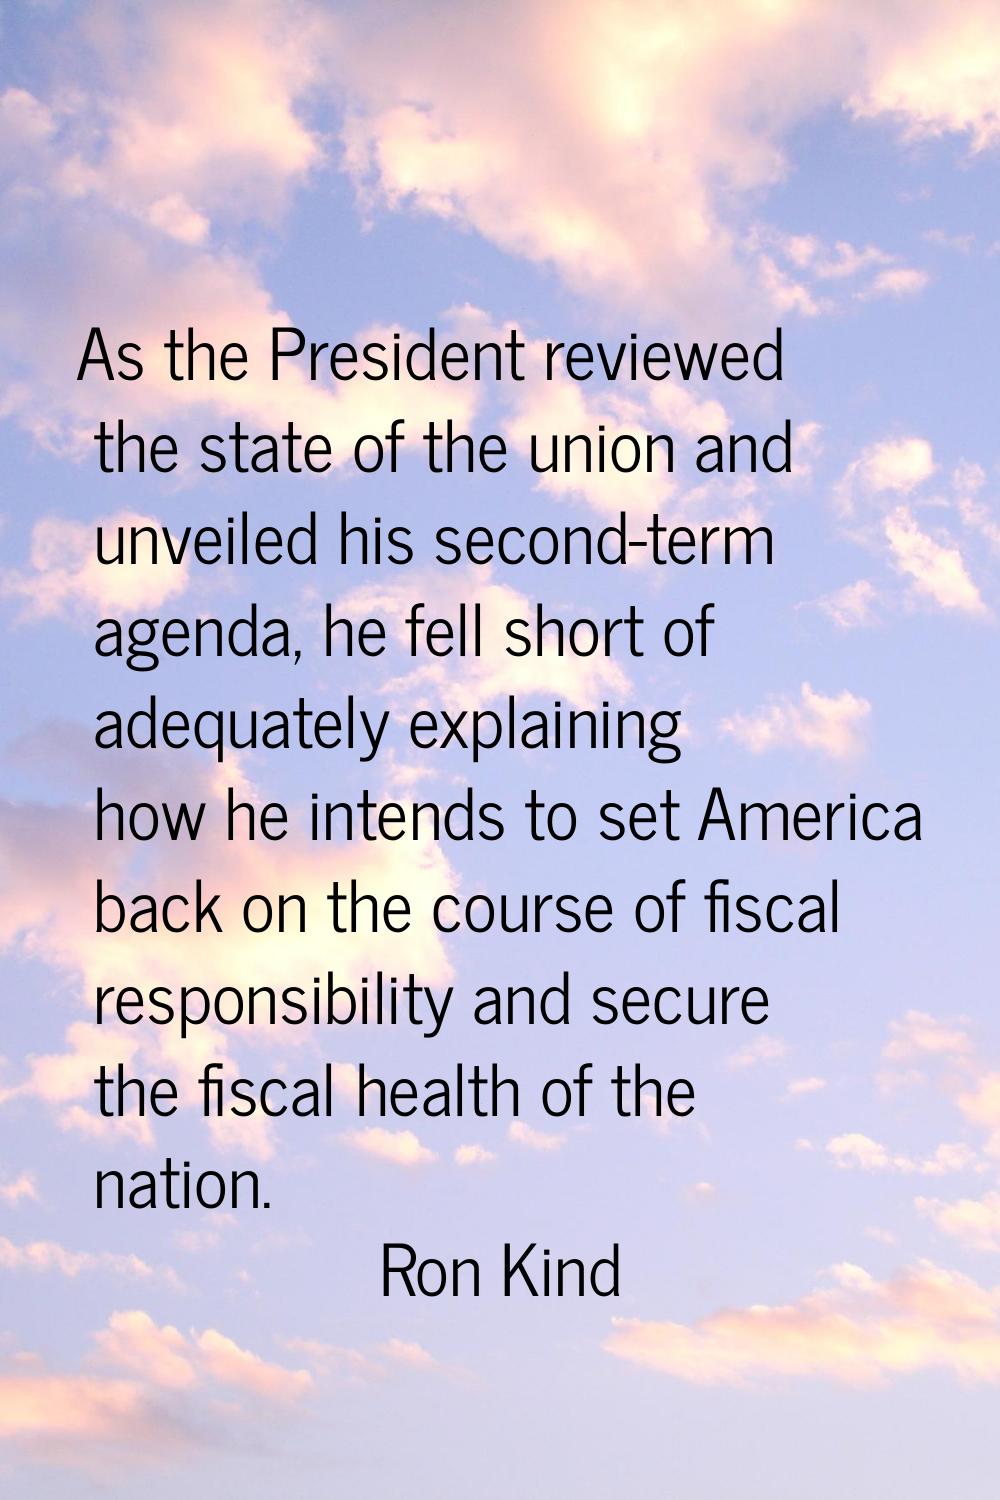 As the President reviewed the state of the union and unveiled his second-term agenda, he fell short